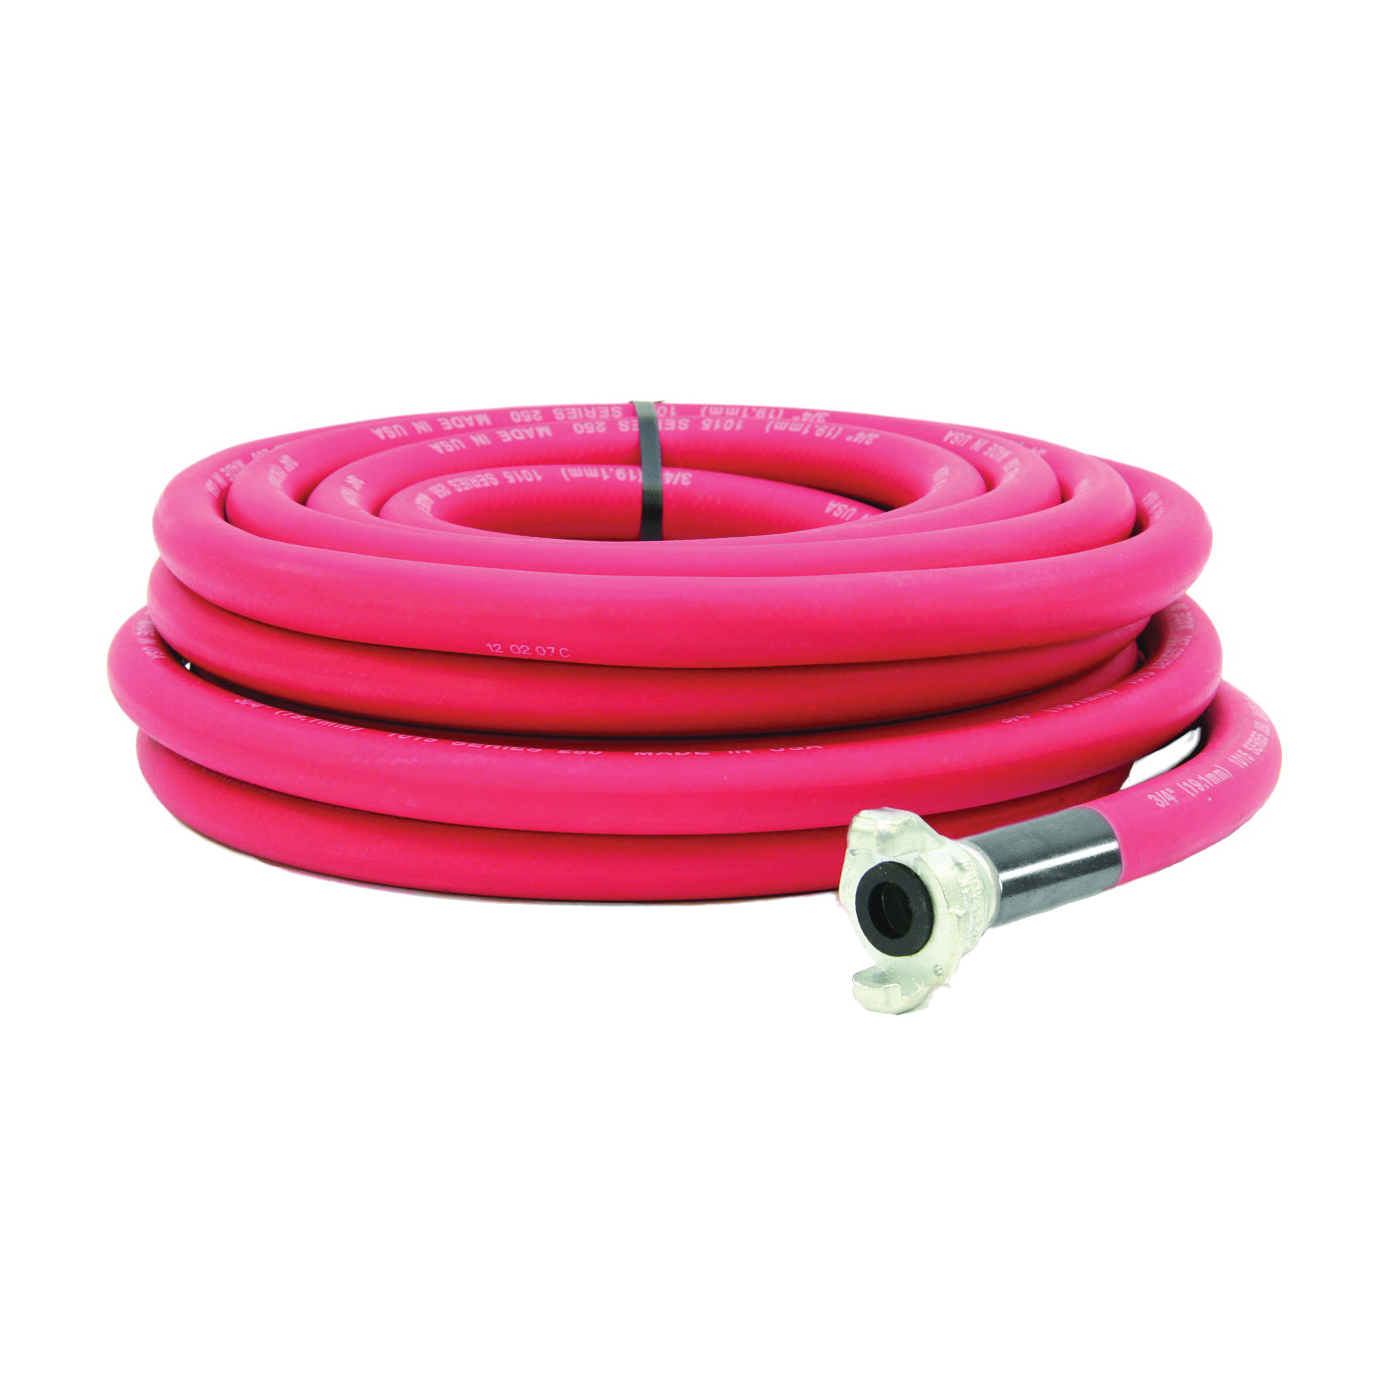 1025-0750R-50-CRS Air Hose, 3/4 in ID, 50 ft L, MNPT, 300 psi Pressure, EPDM Rubber, Red